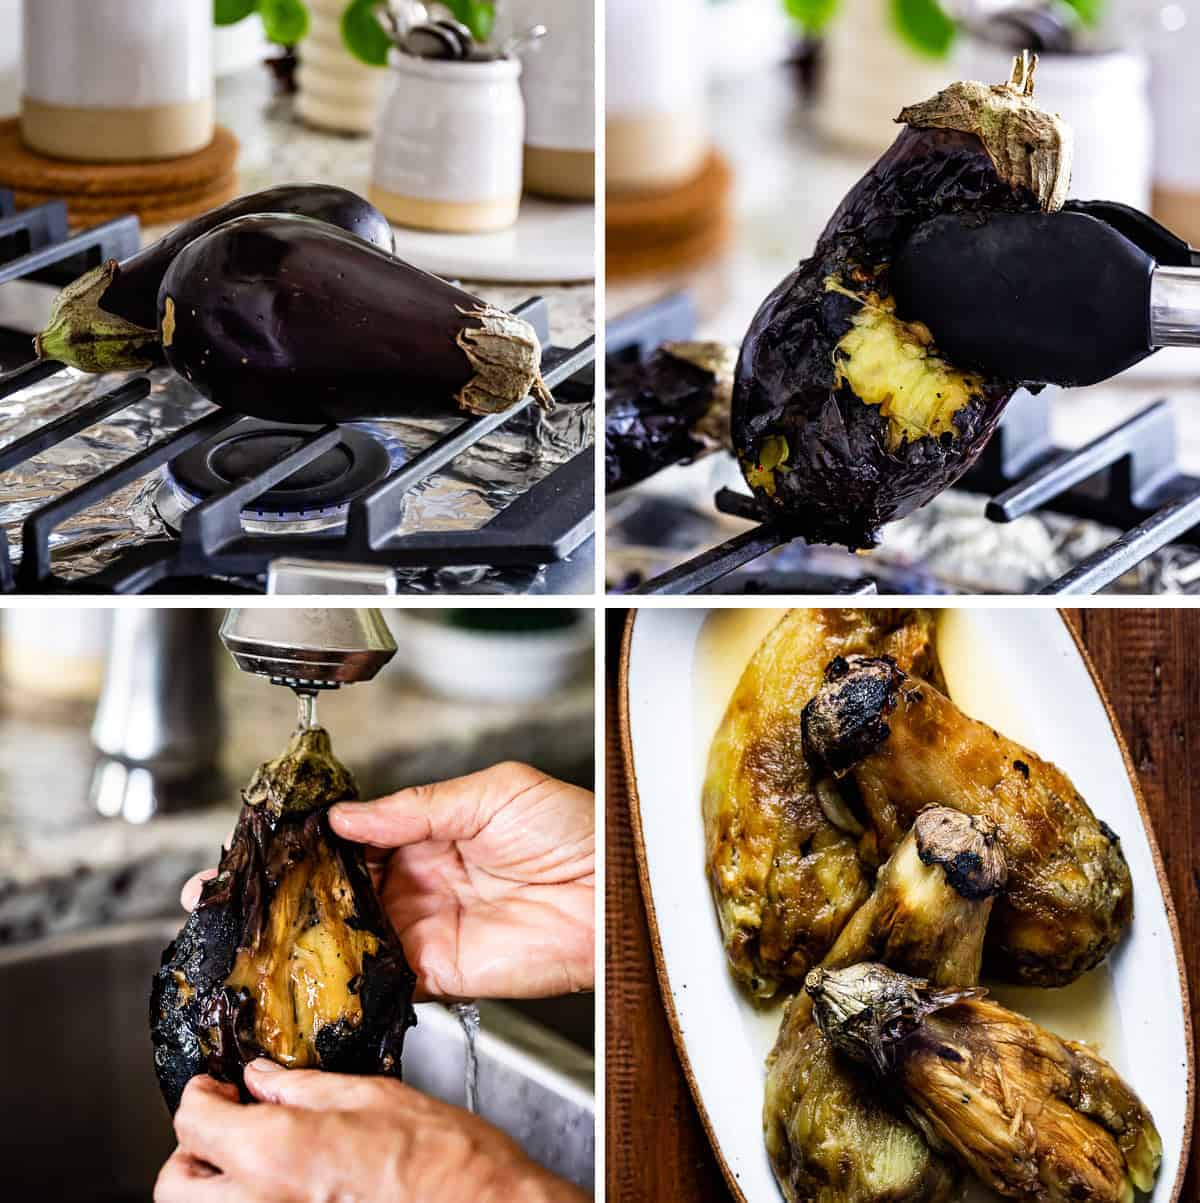 Photos showing how to roast brinjal on stove top